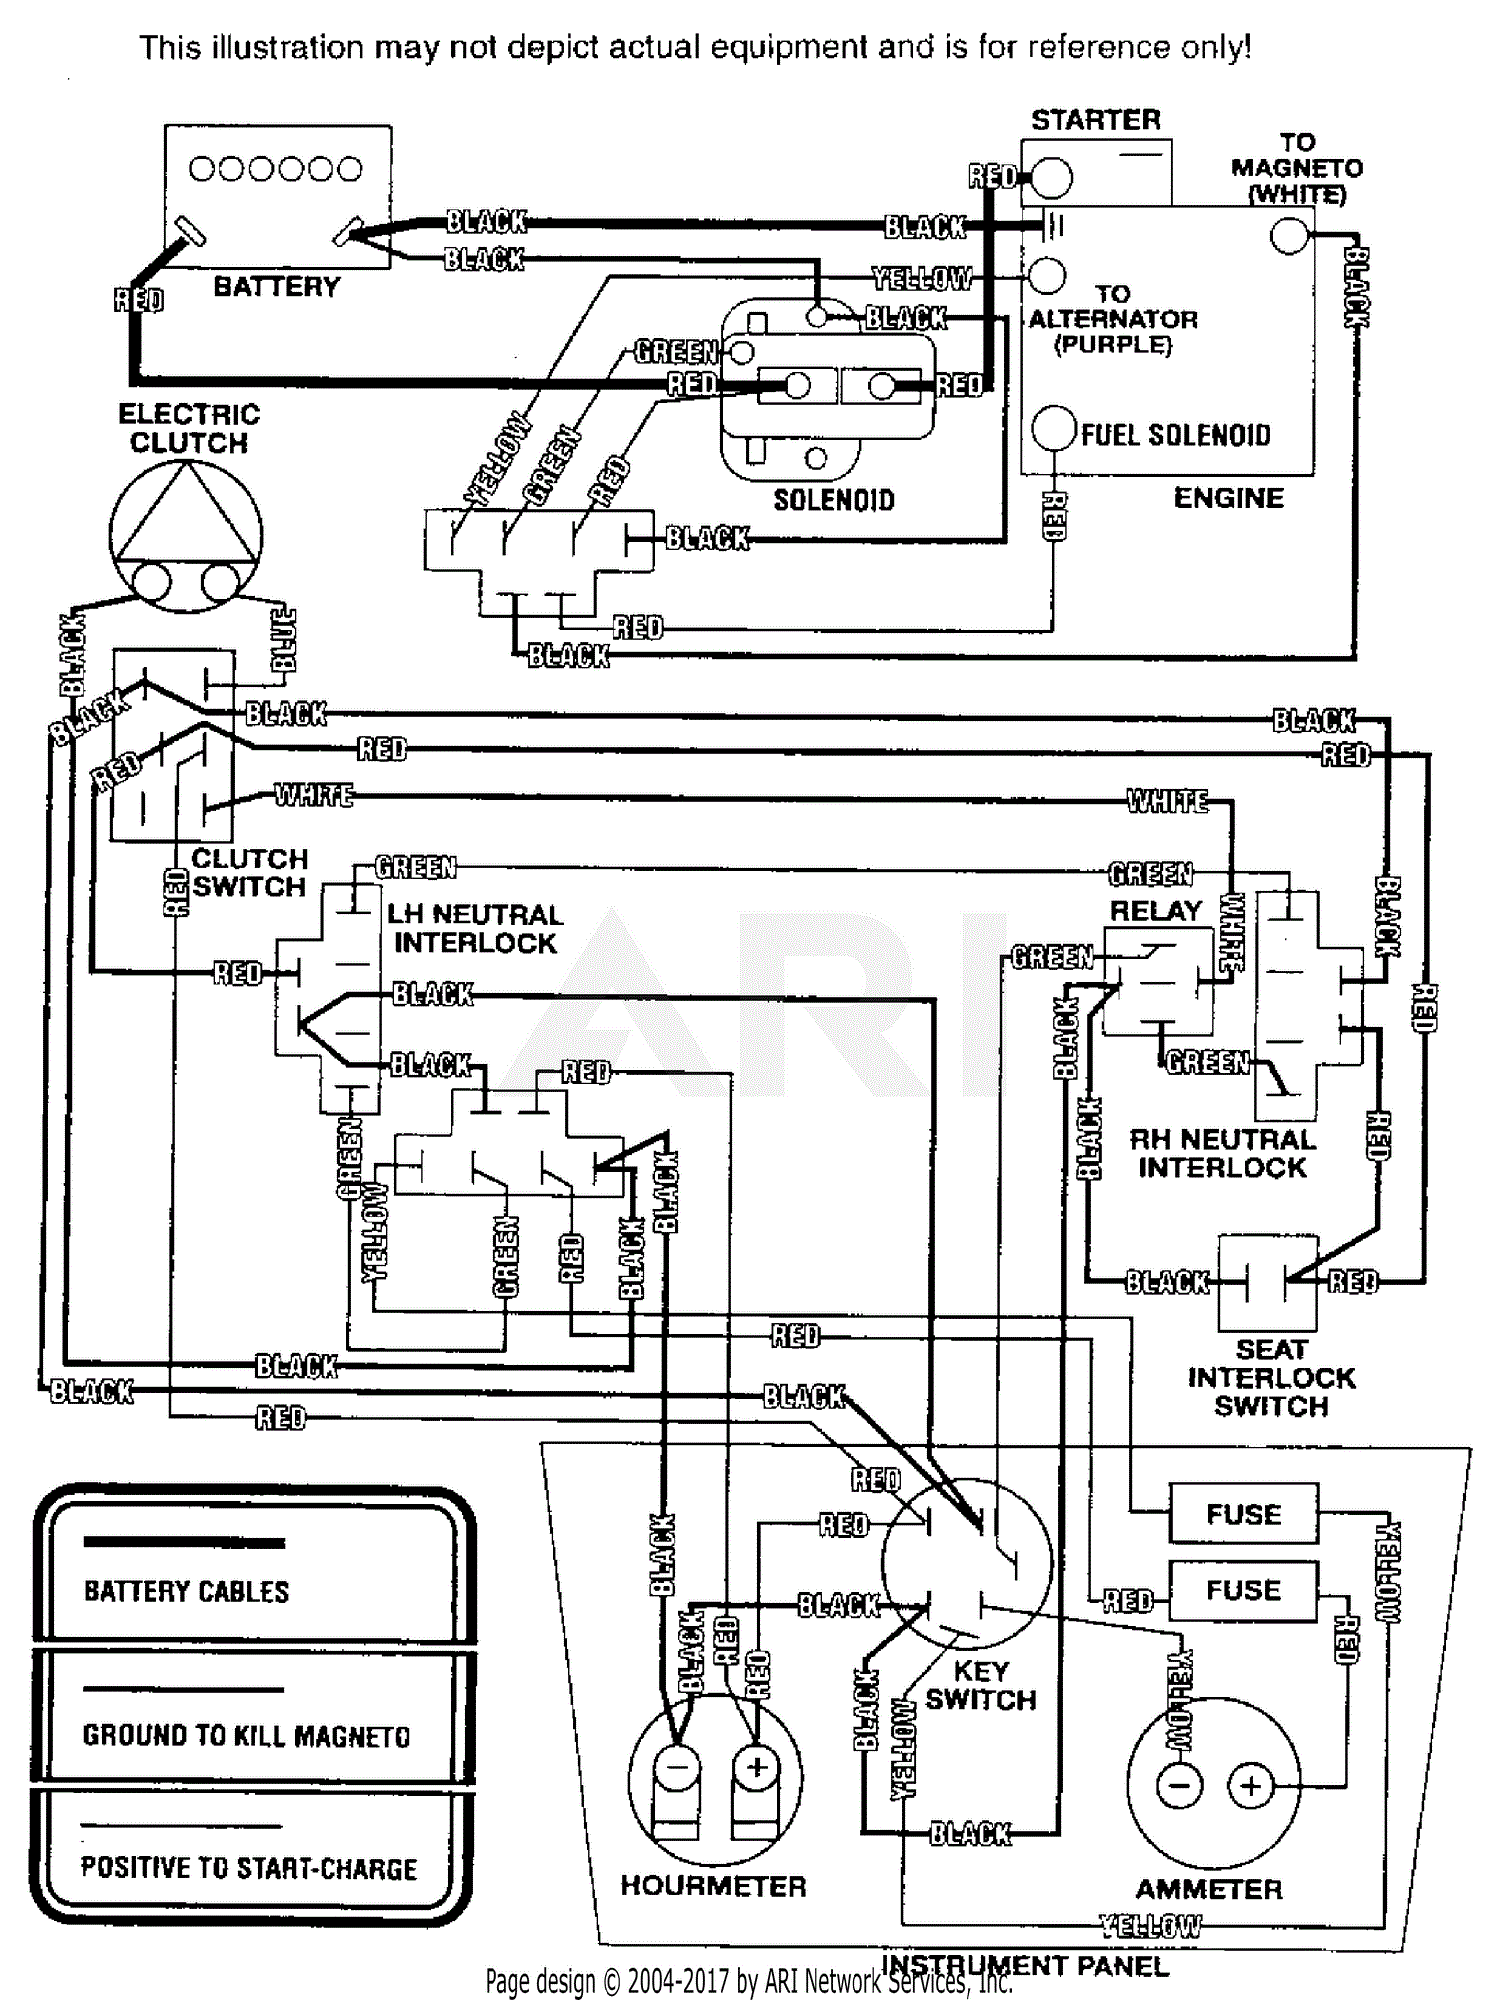 Parts Diagram For Electrical Wiring